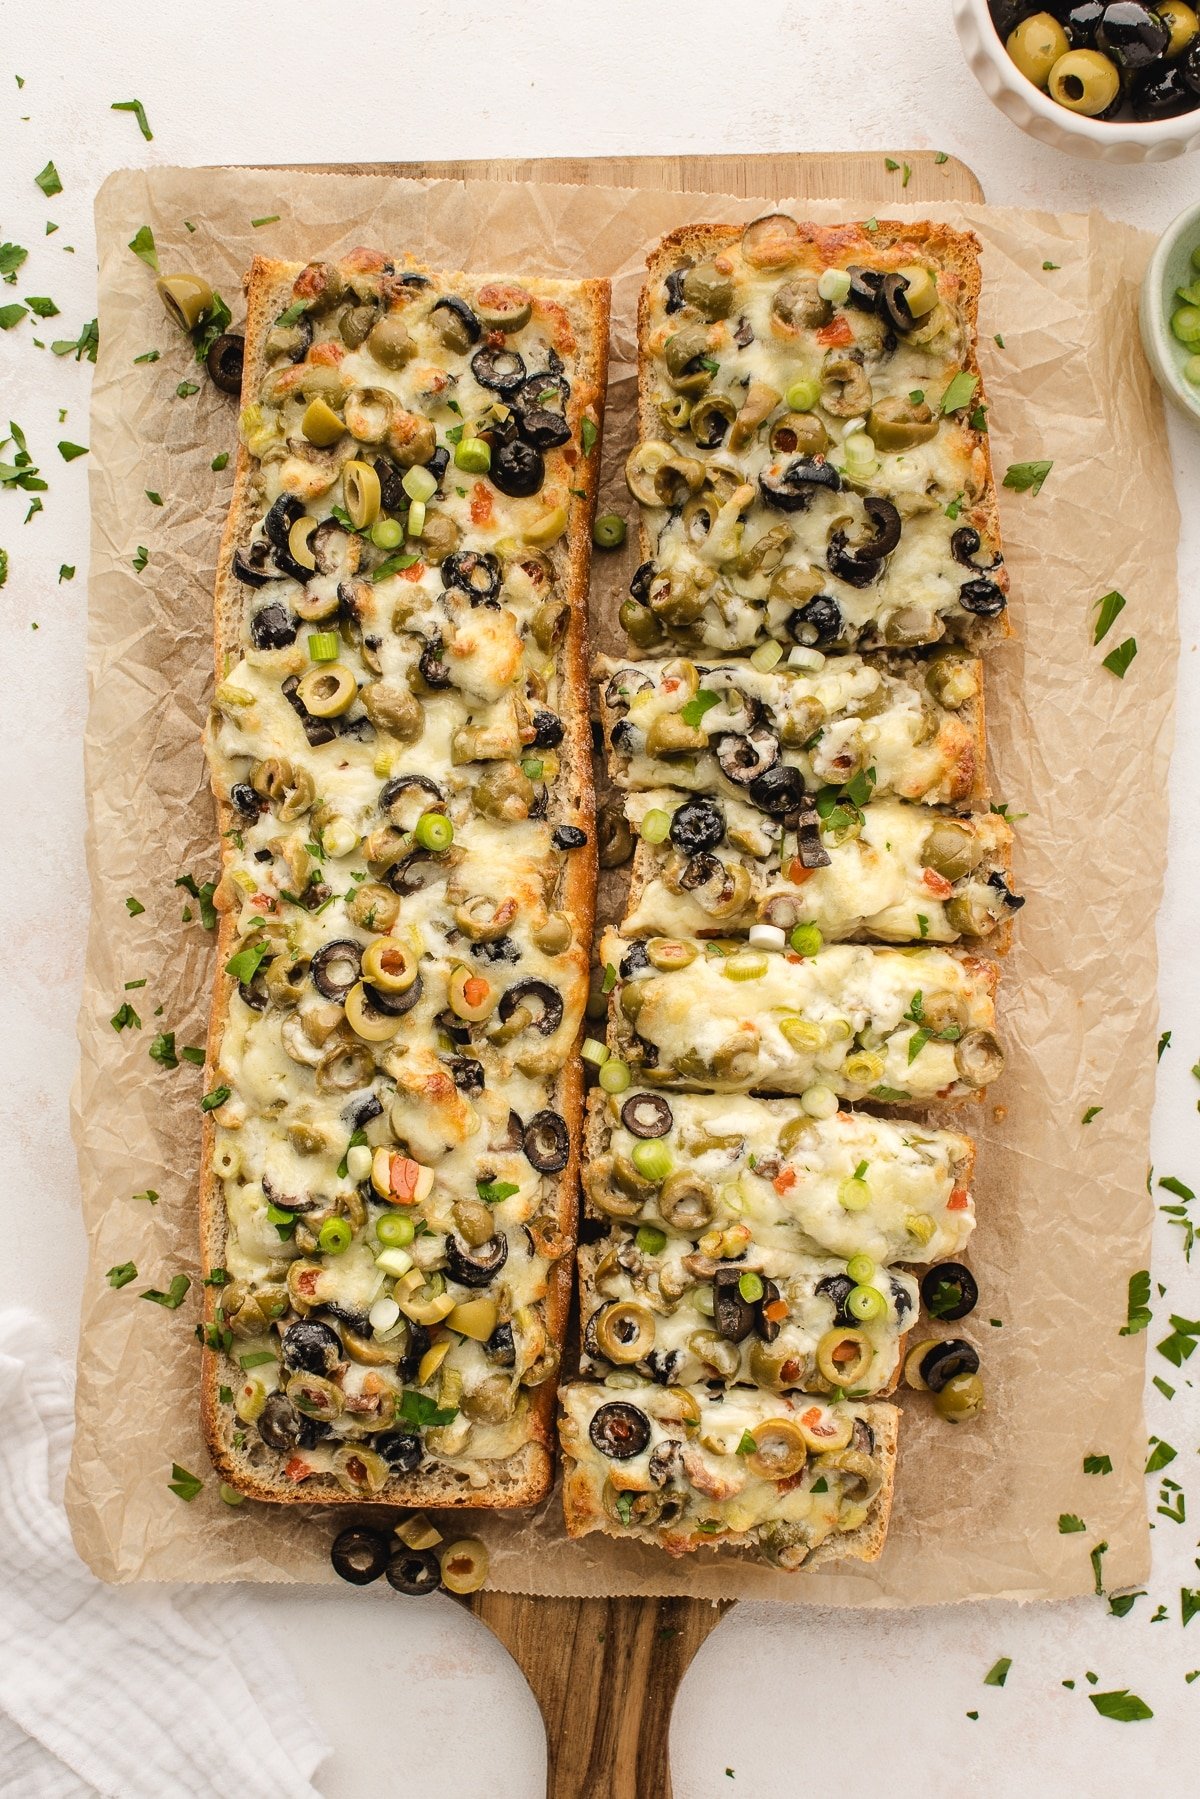 French bread with olive and cheese spread